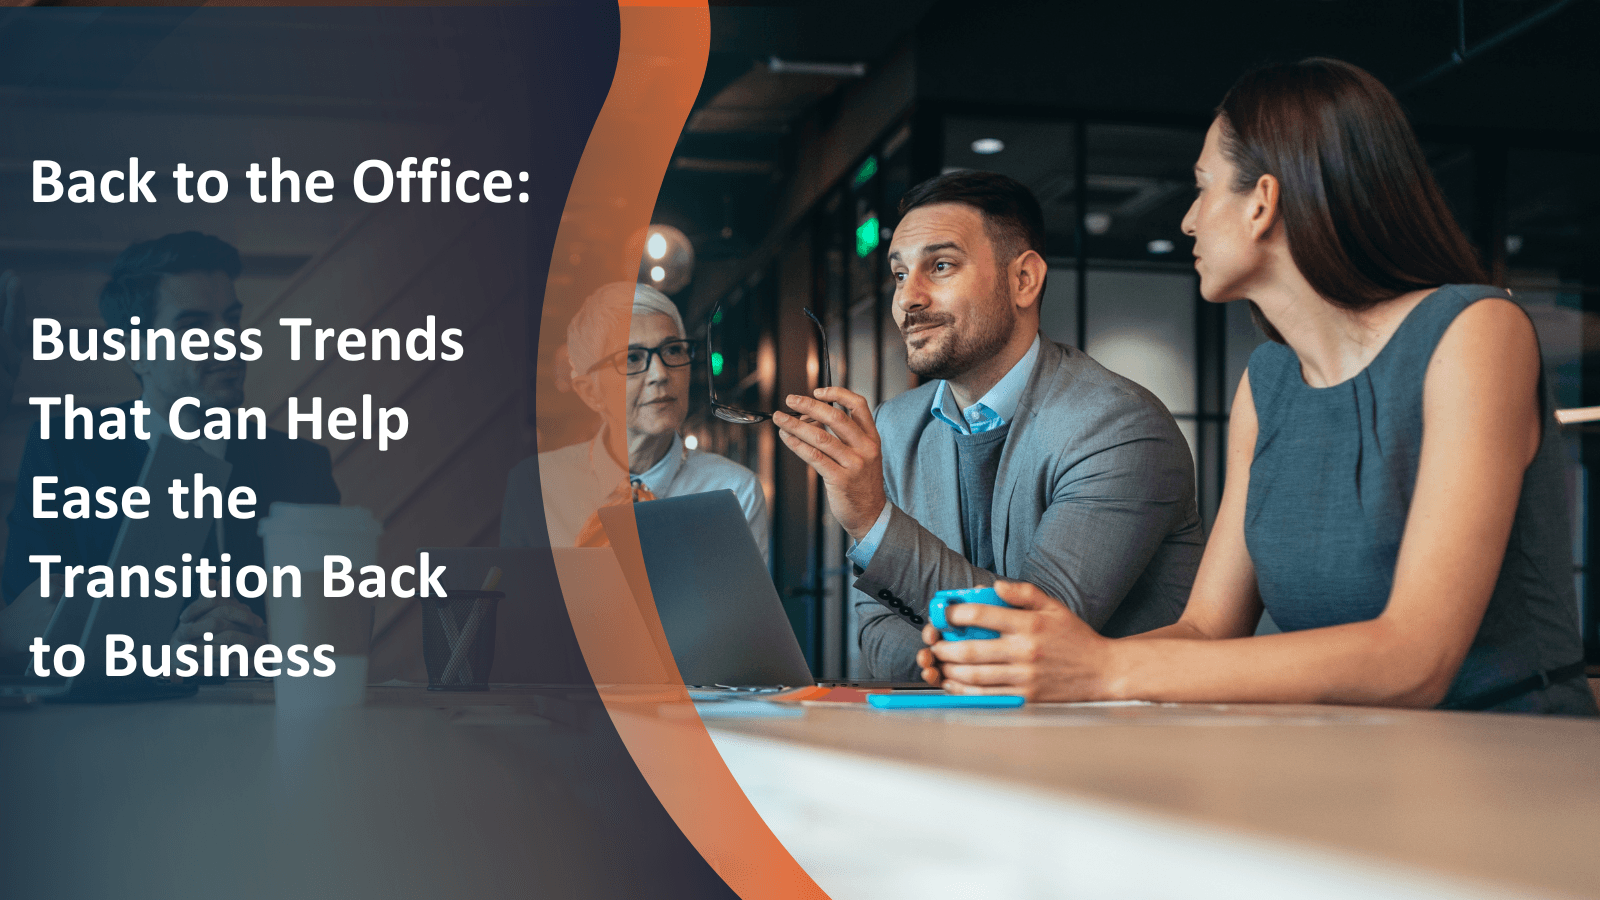 Back to the Office: Businesses Trends That Can Help Ease the Transition Back to Business